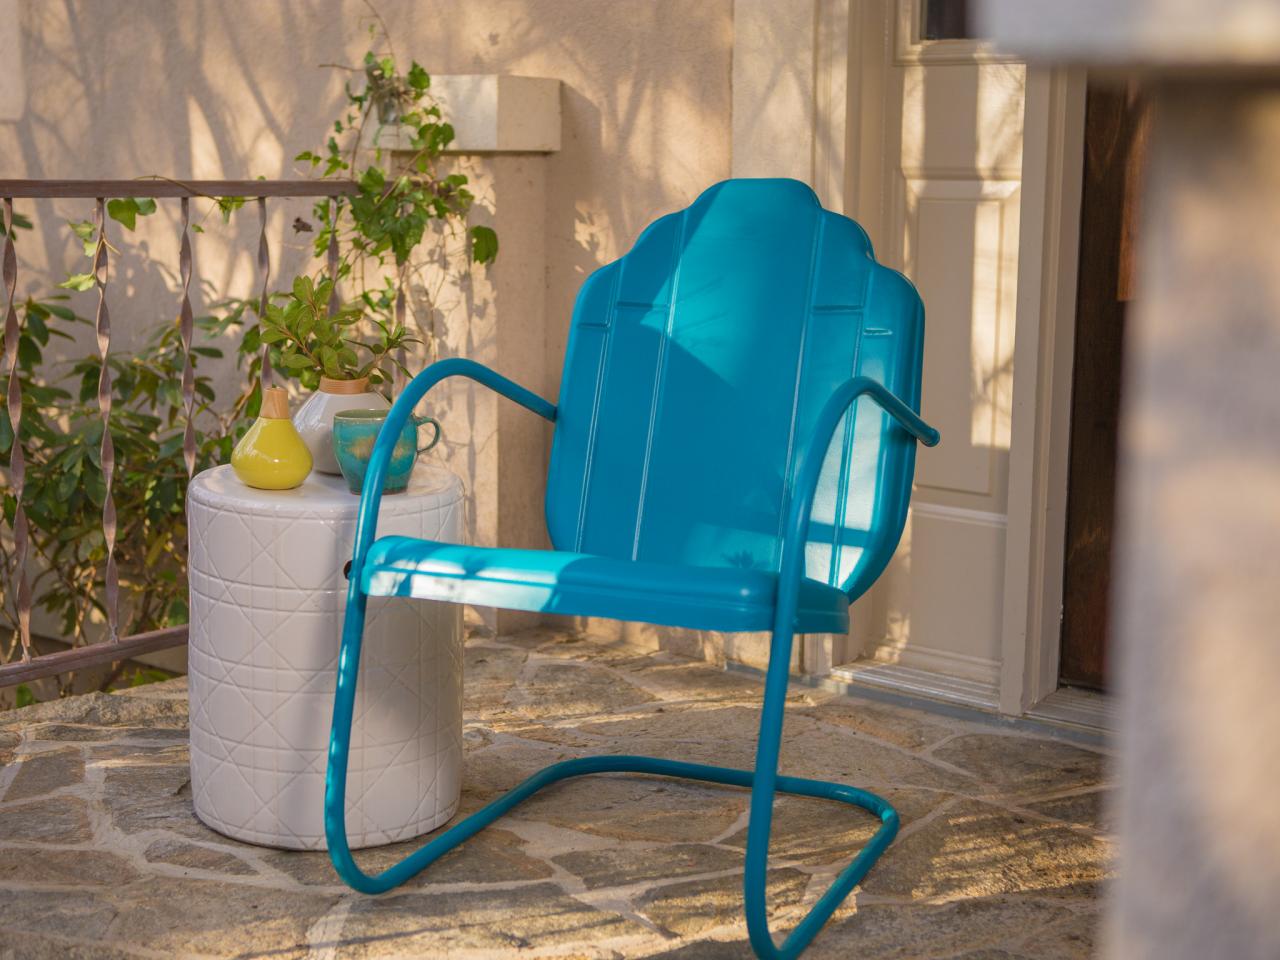 How To Paint An Outdoor Metal Chair, Can I Spray Paint My Metal Garden Furniture